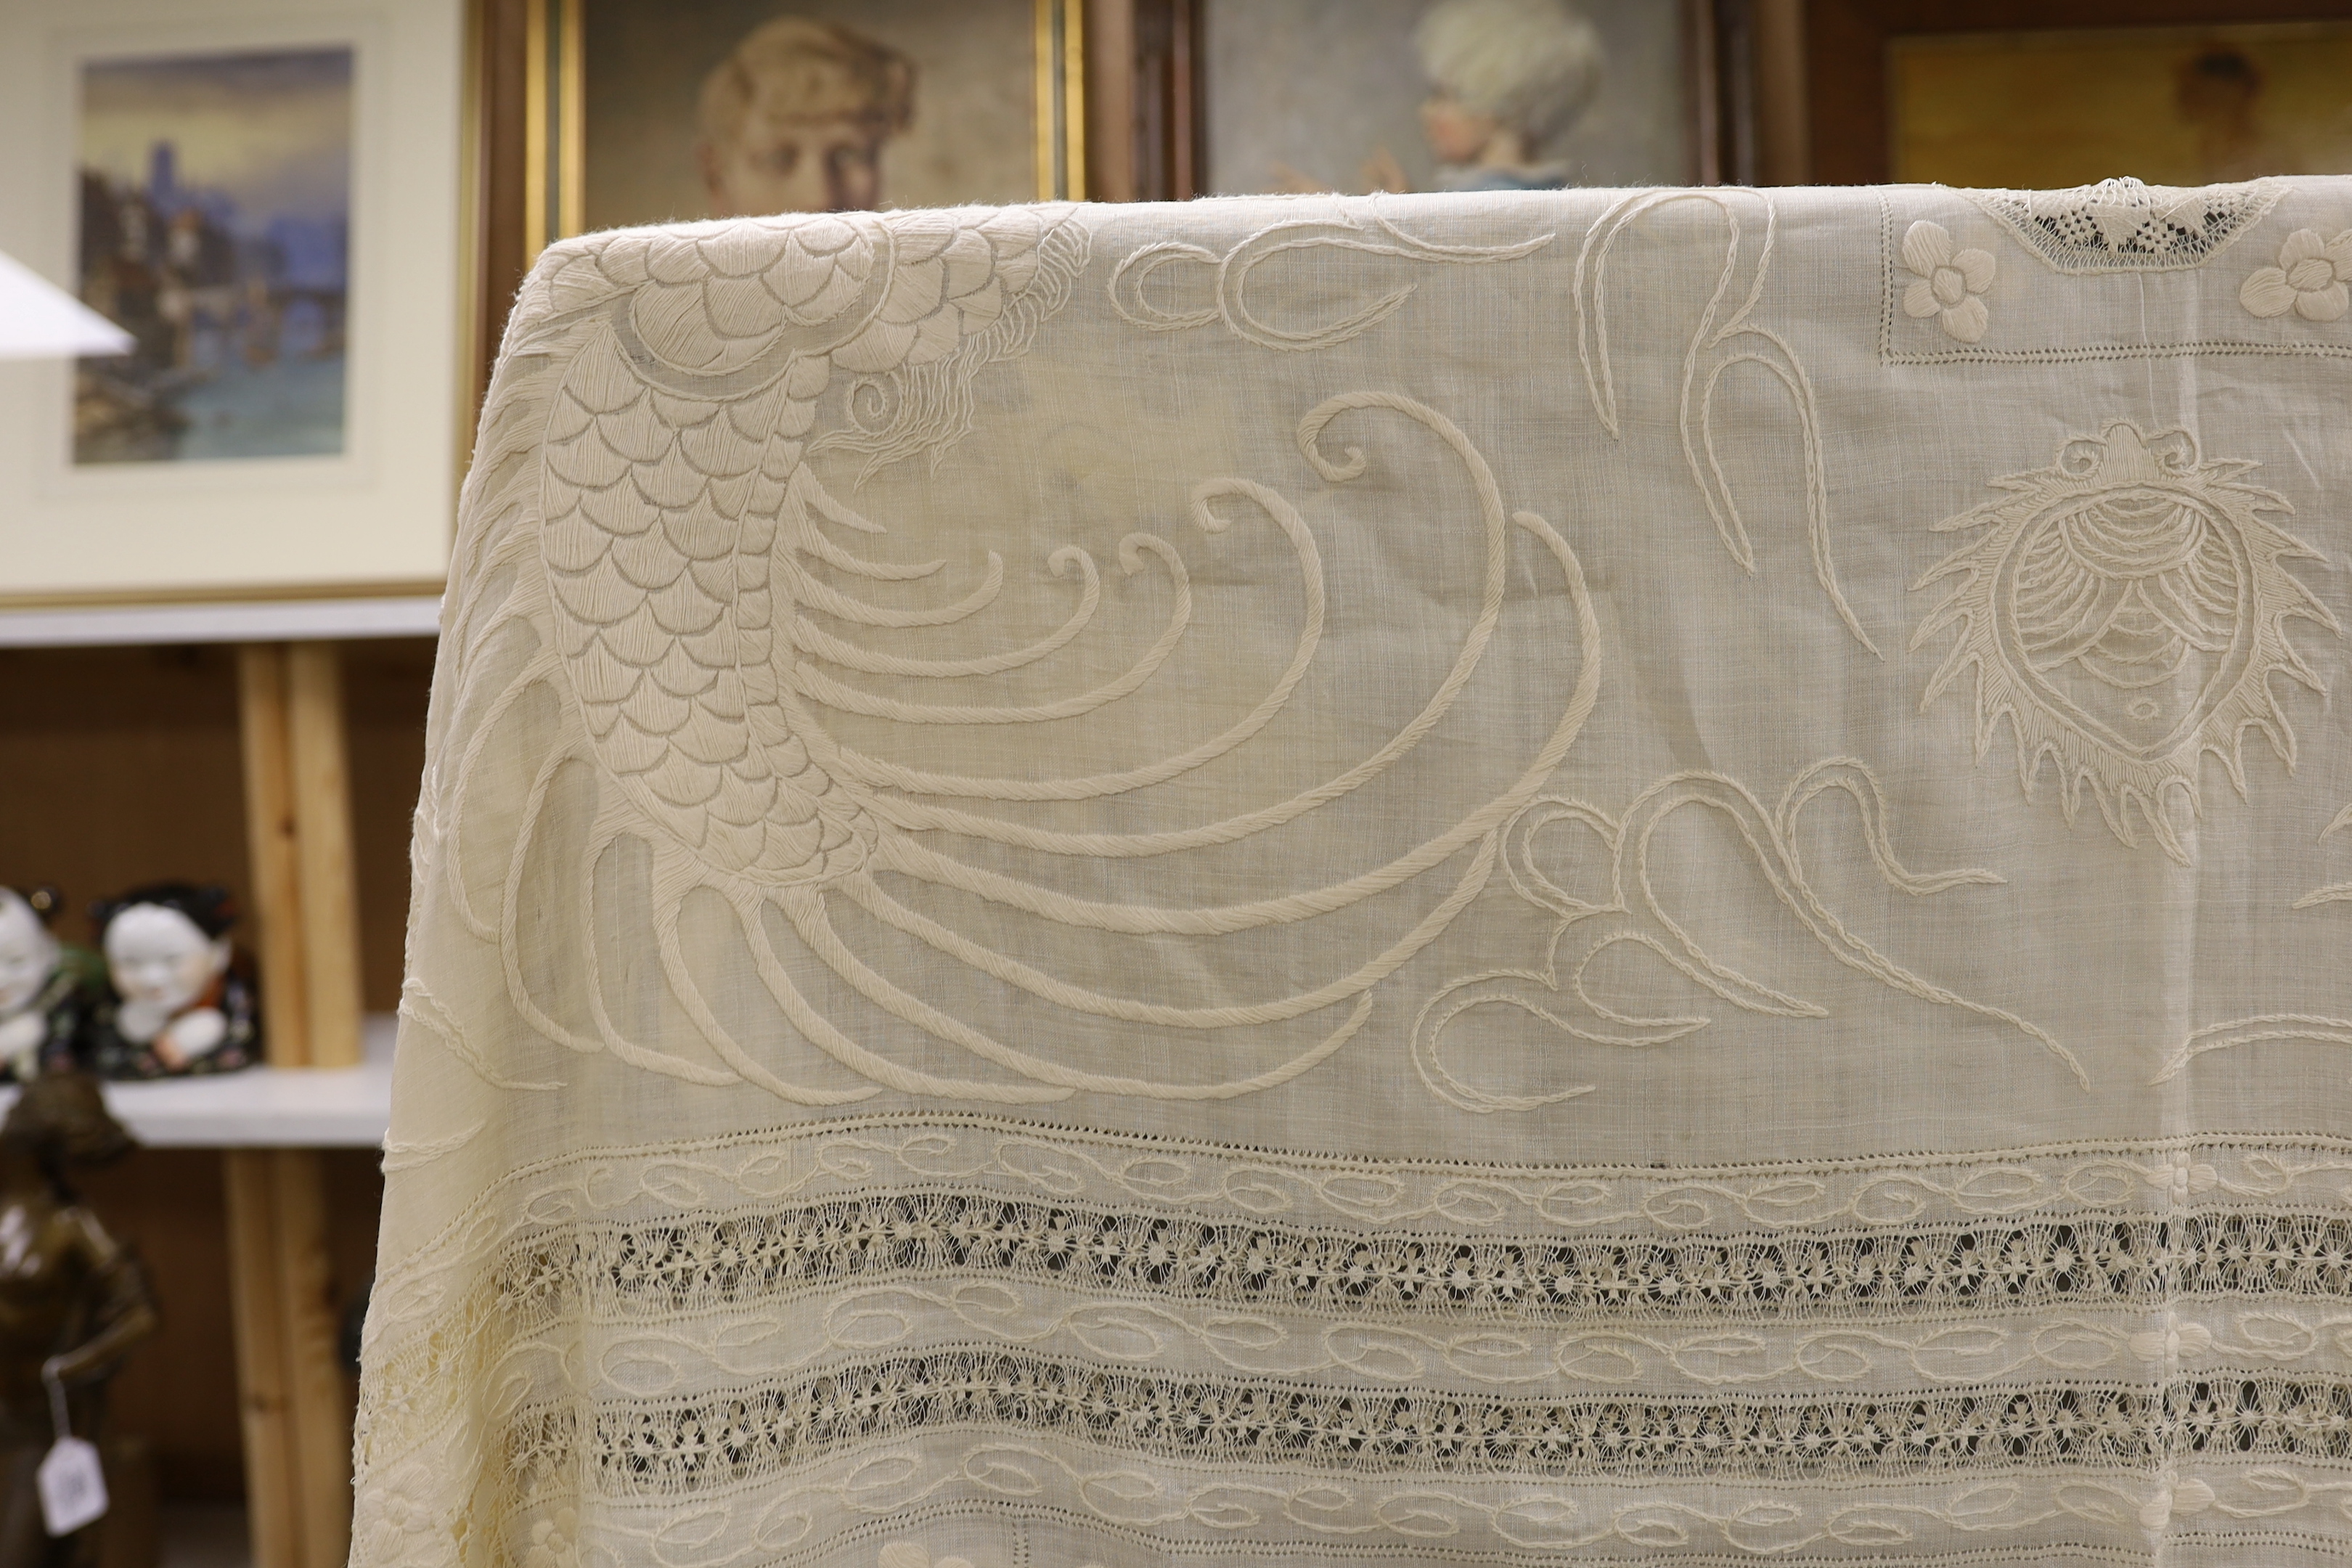 A 20th century Chinese dragon embroidered and drawn thread worked fine linen table cloth, 194cm x 240cm